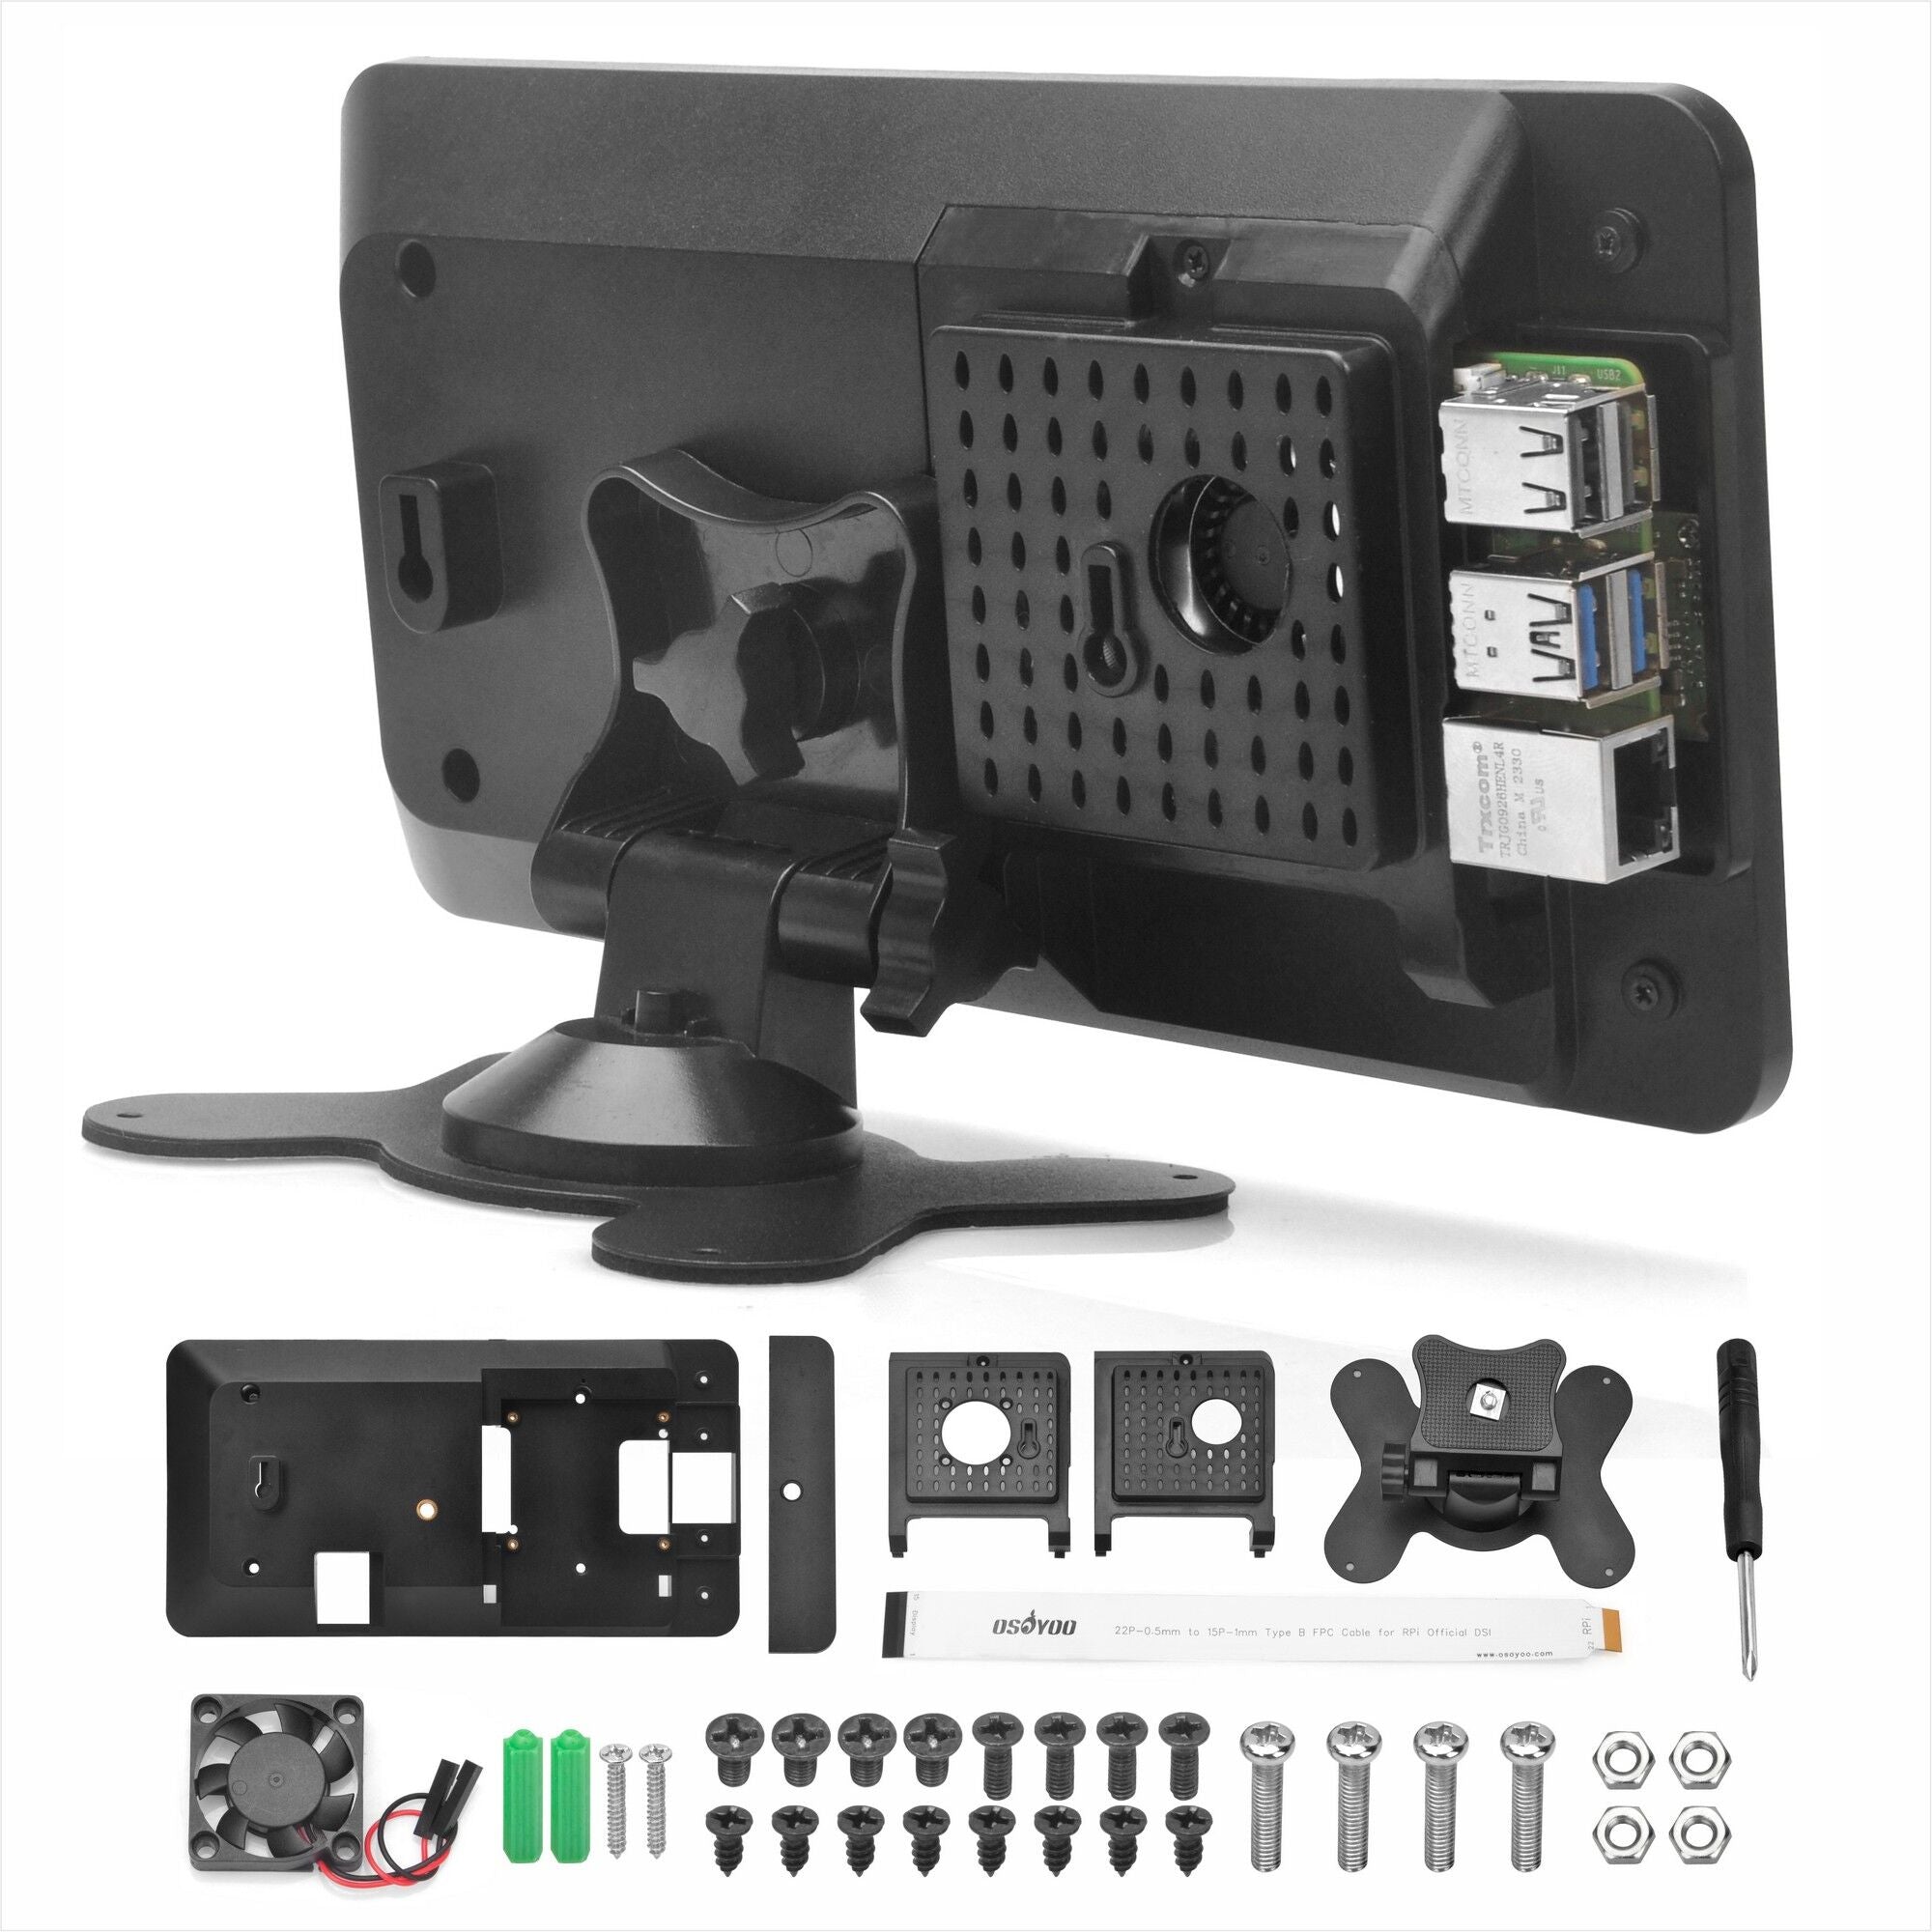 OSOYOO PiStudio Case for Raspberry Pi 5/4/3/2 - Compatible with Raspberry Pi Official 7inch DSI touch screen and OSOYOO 7” IPS DSI display and the Ultimate Desktop Solution Transforming Your Pi into a User-Friendly and High-Performance Workstation